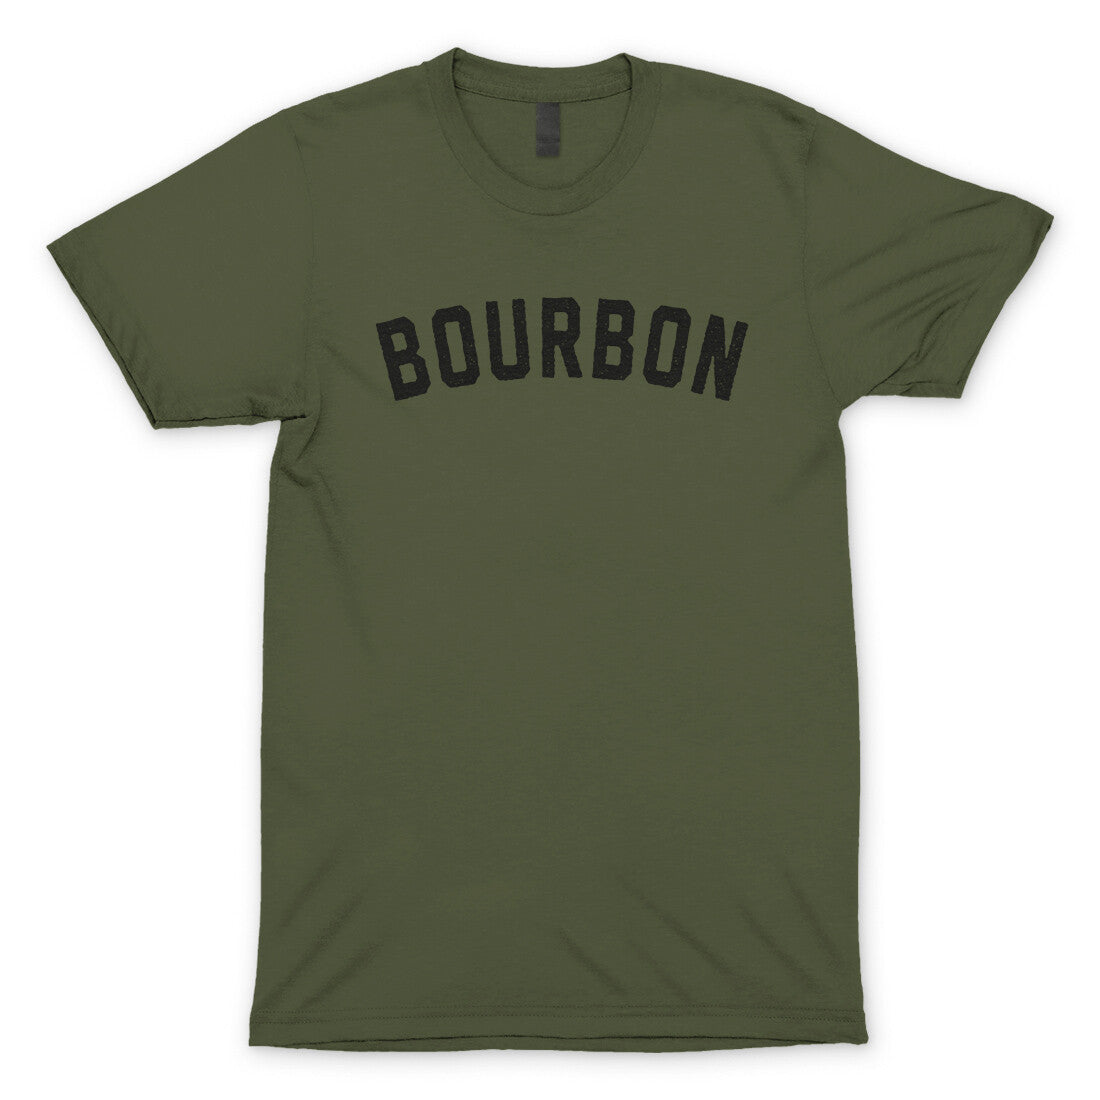 Bourbon in Military Green Color